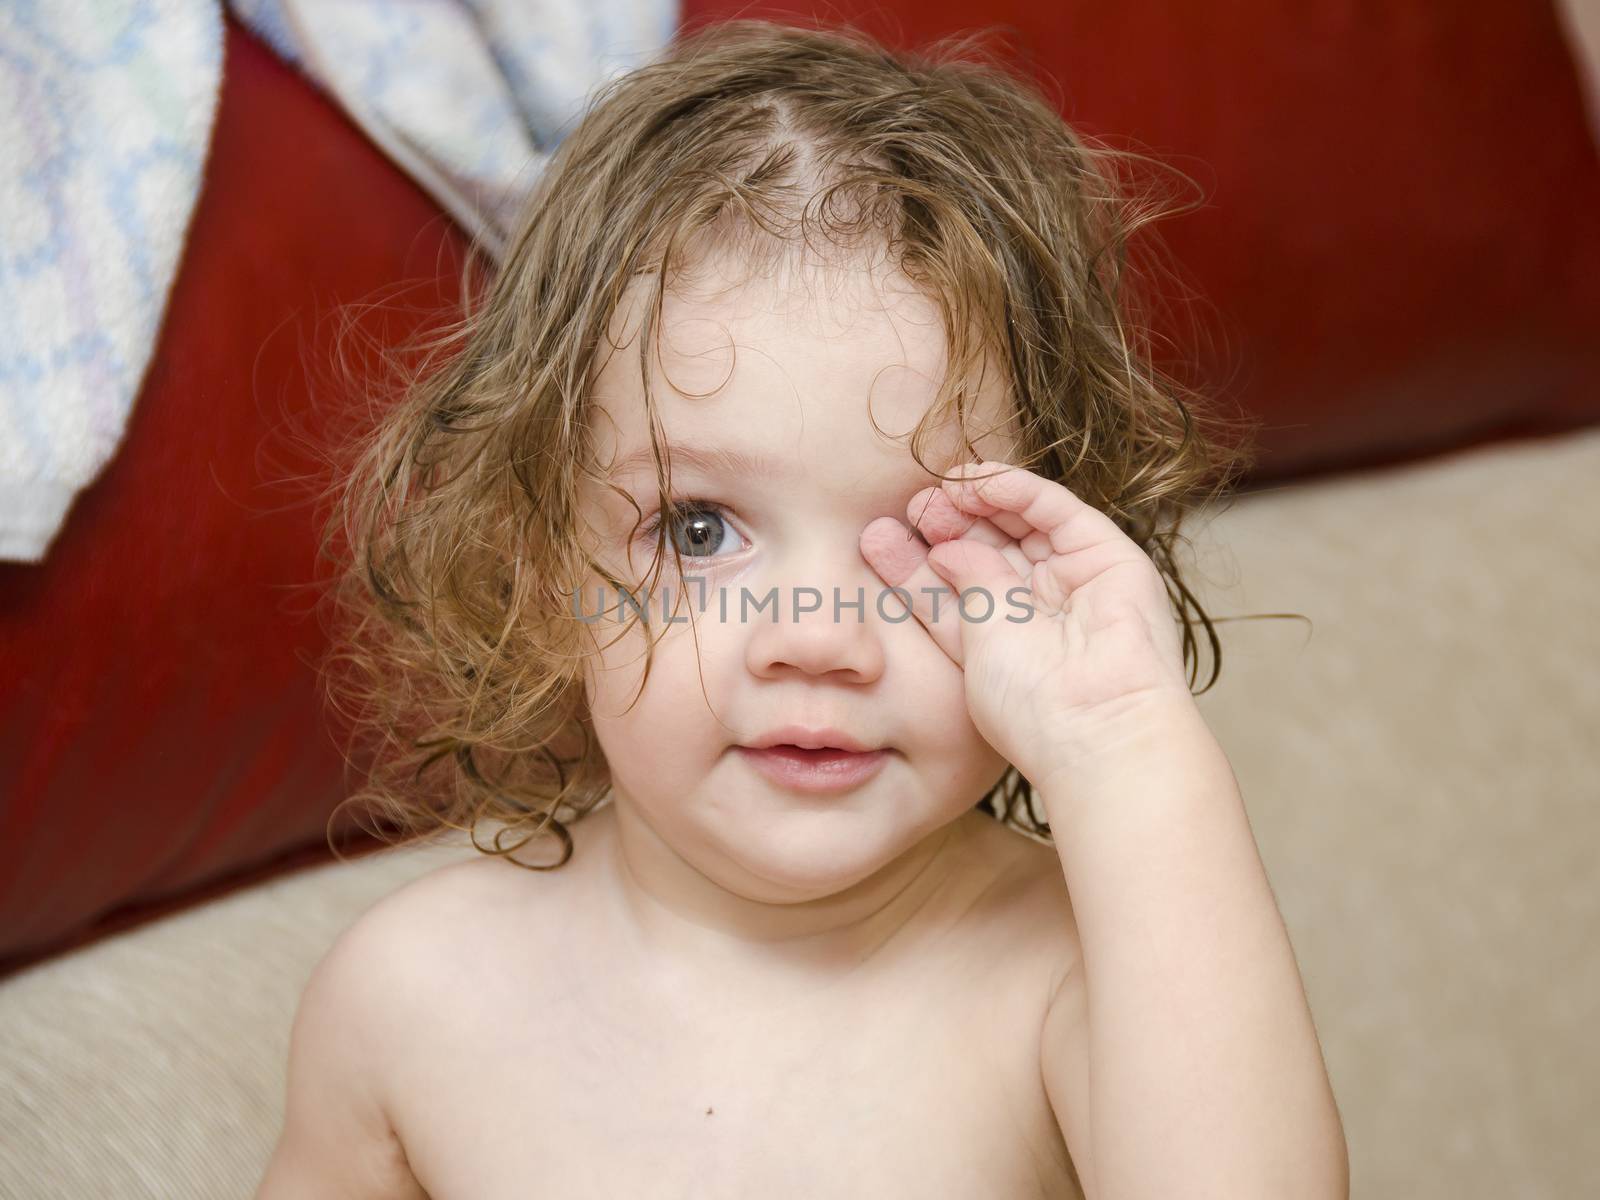 Baby wipes his eyes after swimming handle. Wet hair, drops on the face. Sitting on the couch.